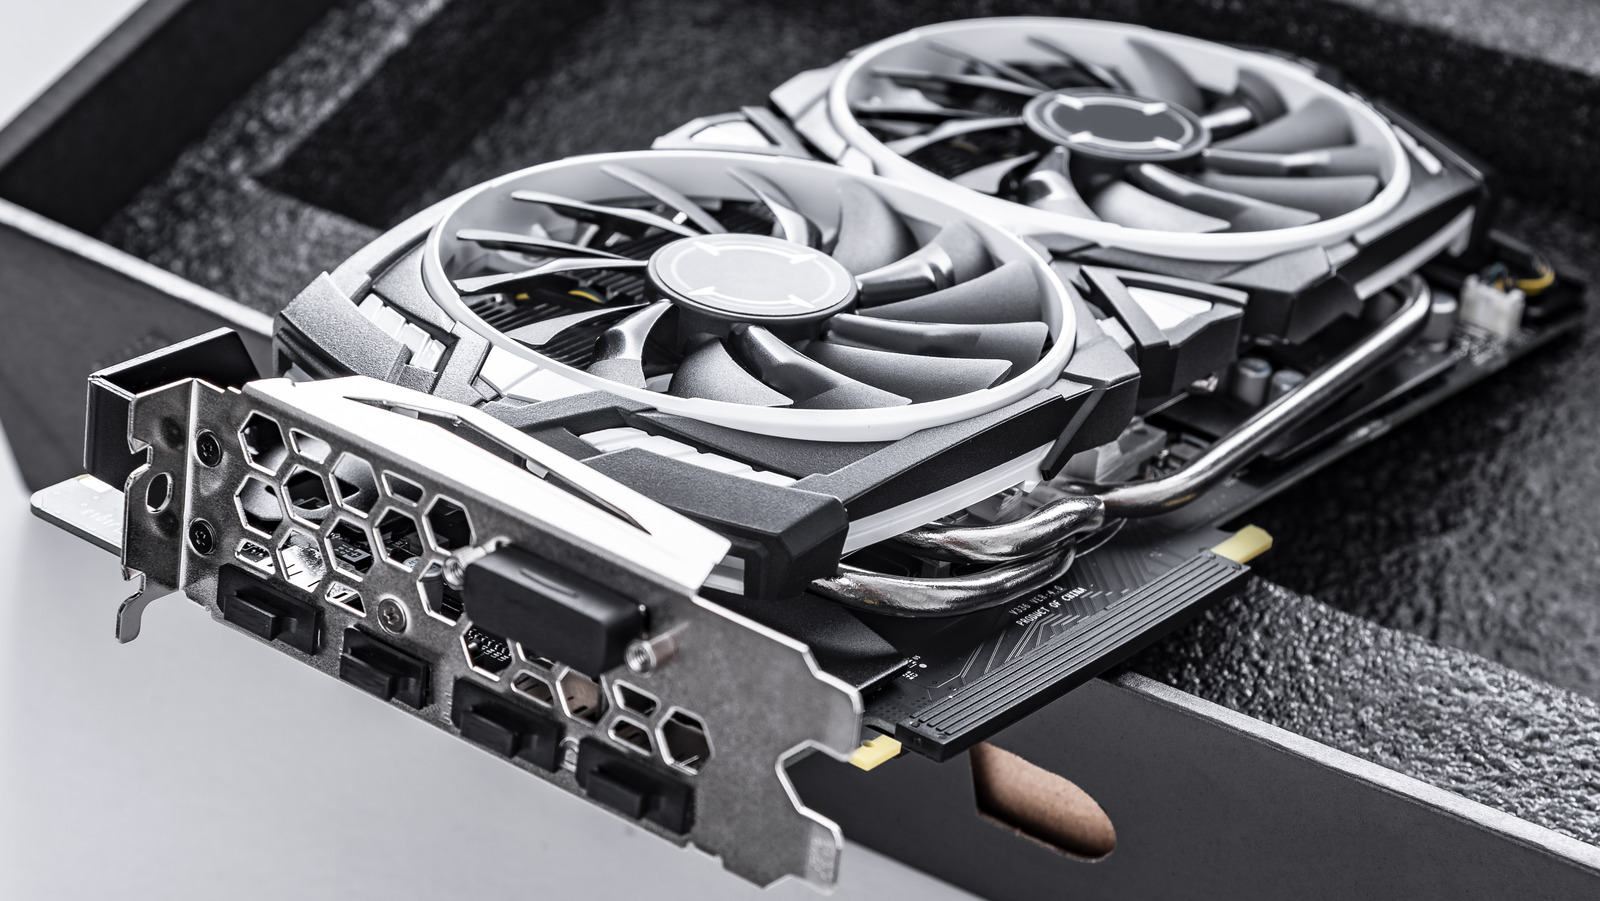 5 Cheap Graphics Cards To Give Your Gaming PC The Boost It Needs